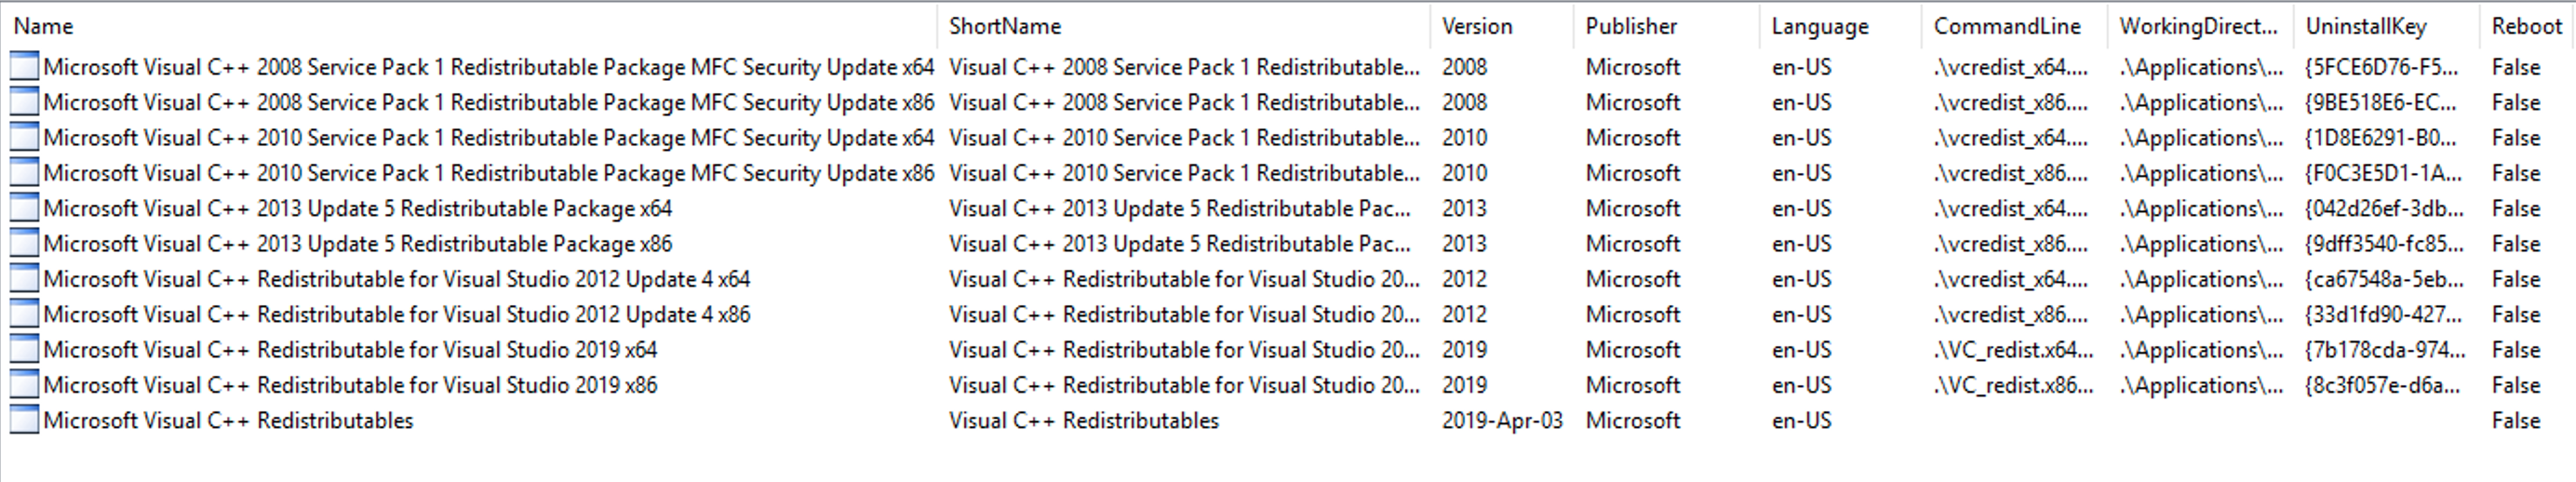 Microsoft Visual C++ Redistributables applications imported into an MDT share